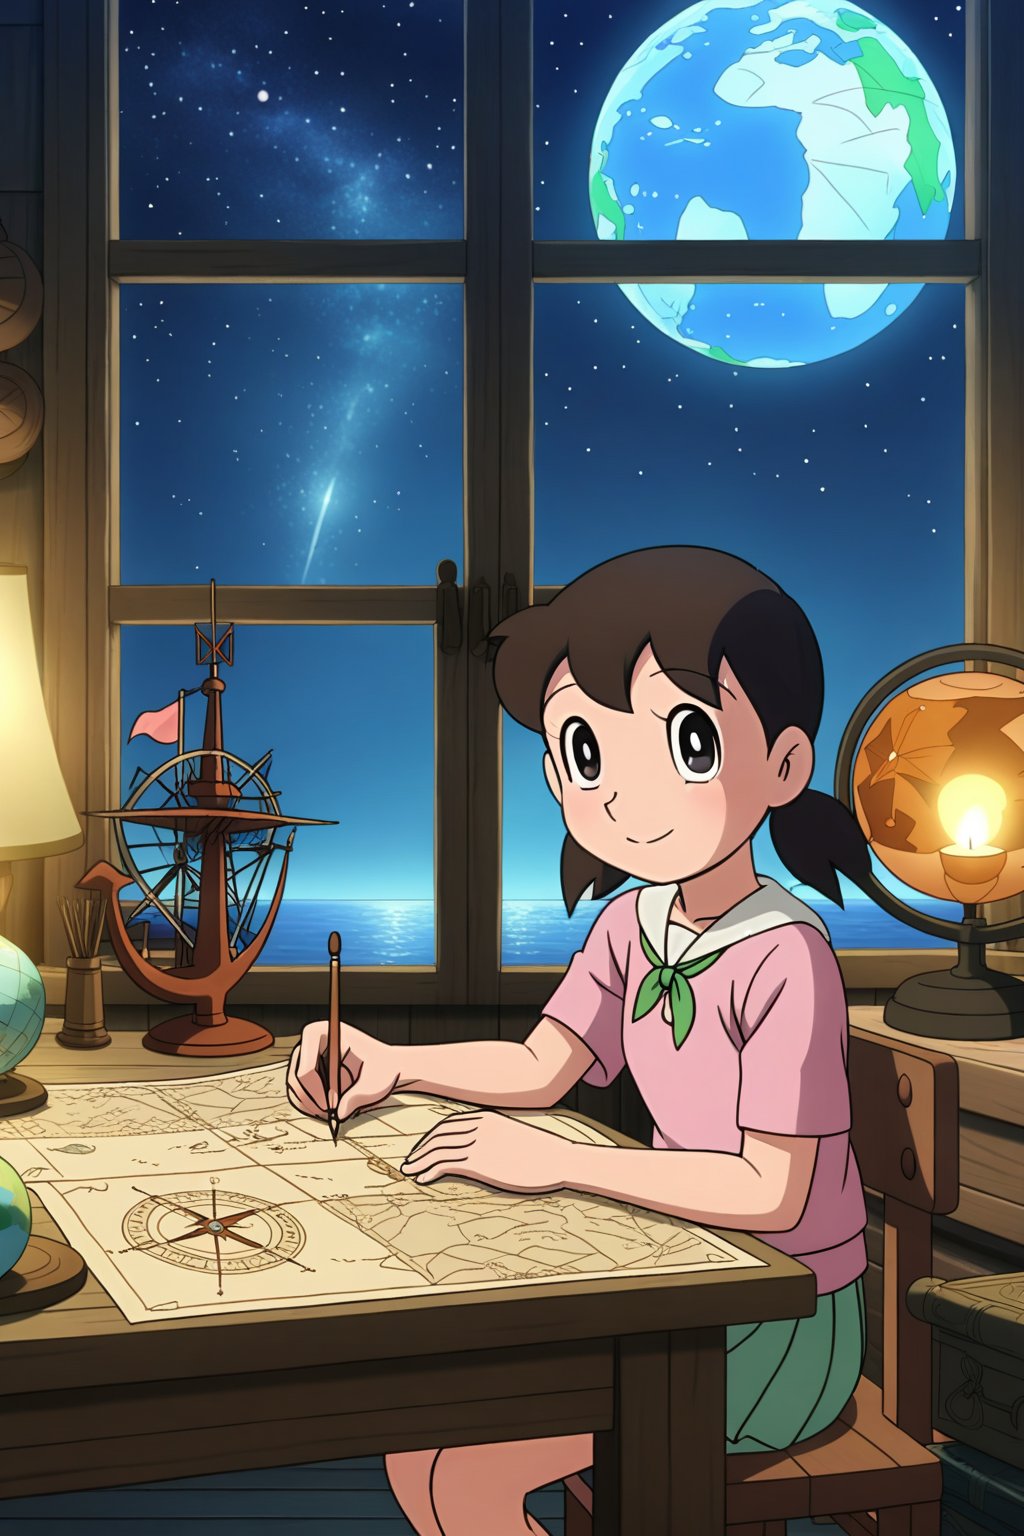 (masterpiece), best quality, expressive eyes, perfect face, anime coloring, 
minamoto shizuka, smile, Teenage girl navigator studying ancient maps in a grand ship's cabin, surrounded by nautical instruments, glowing globe, and exotic artifacts, warm candlelight, tall windows showing a starry night sky and phosphorescent sea, sense of adventure and discovery